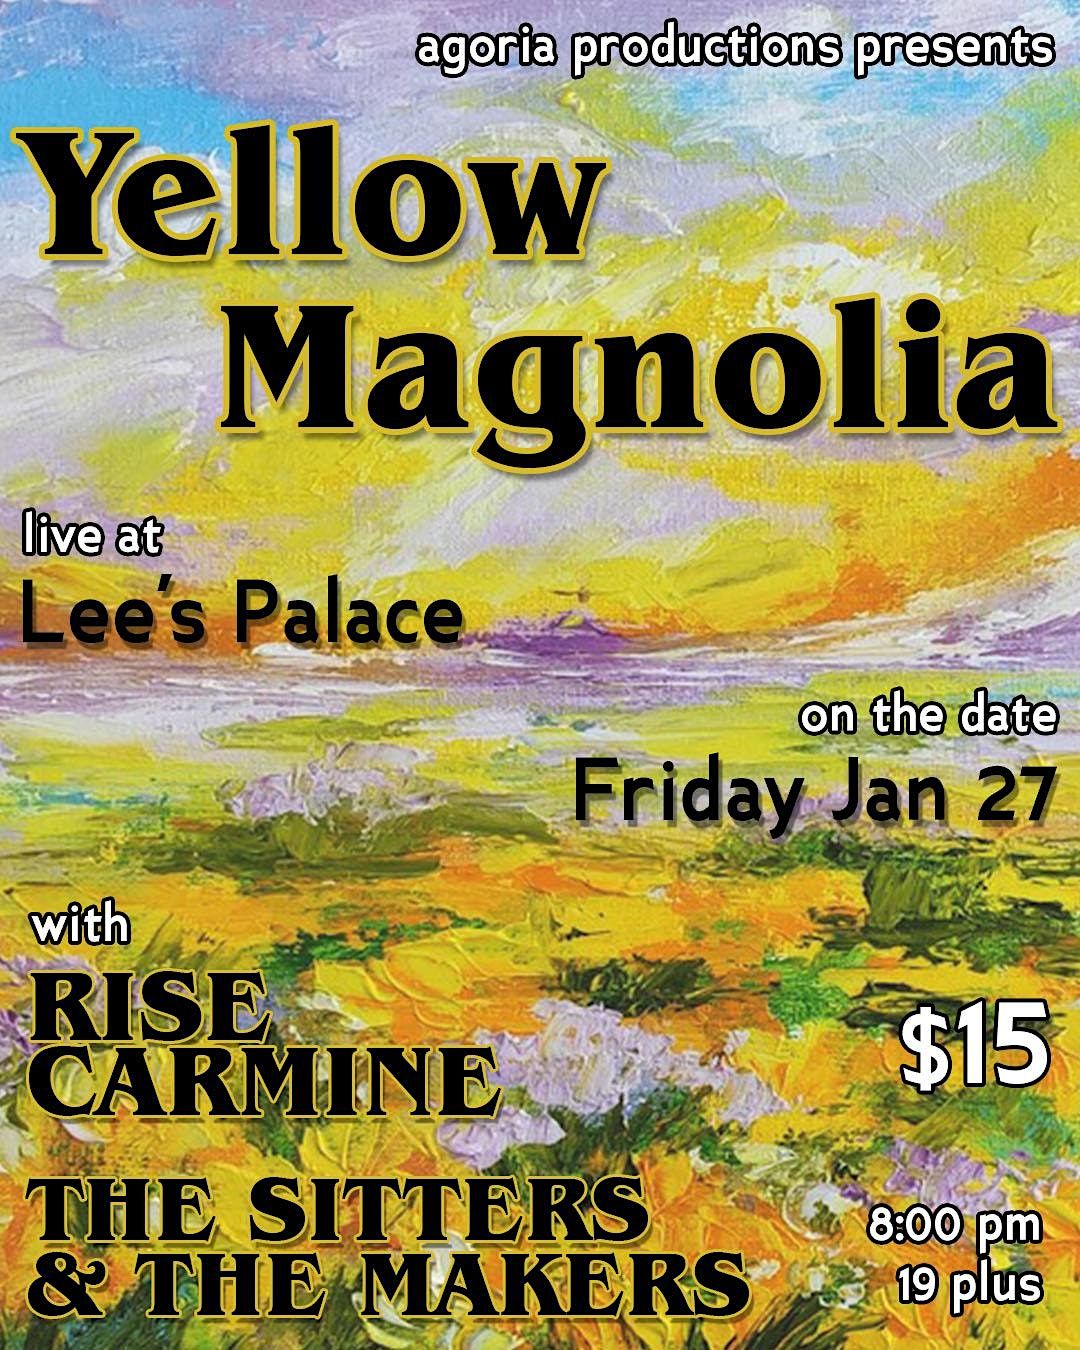 Yellow Magnolia, Rise Carmine + The Sitters & The Makers